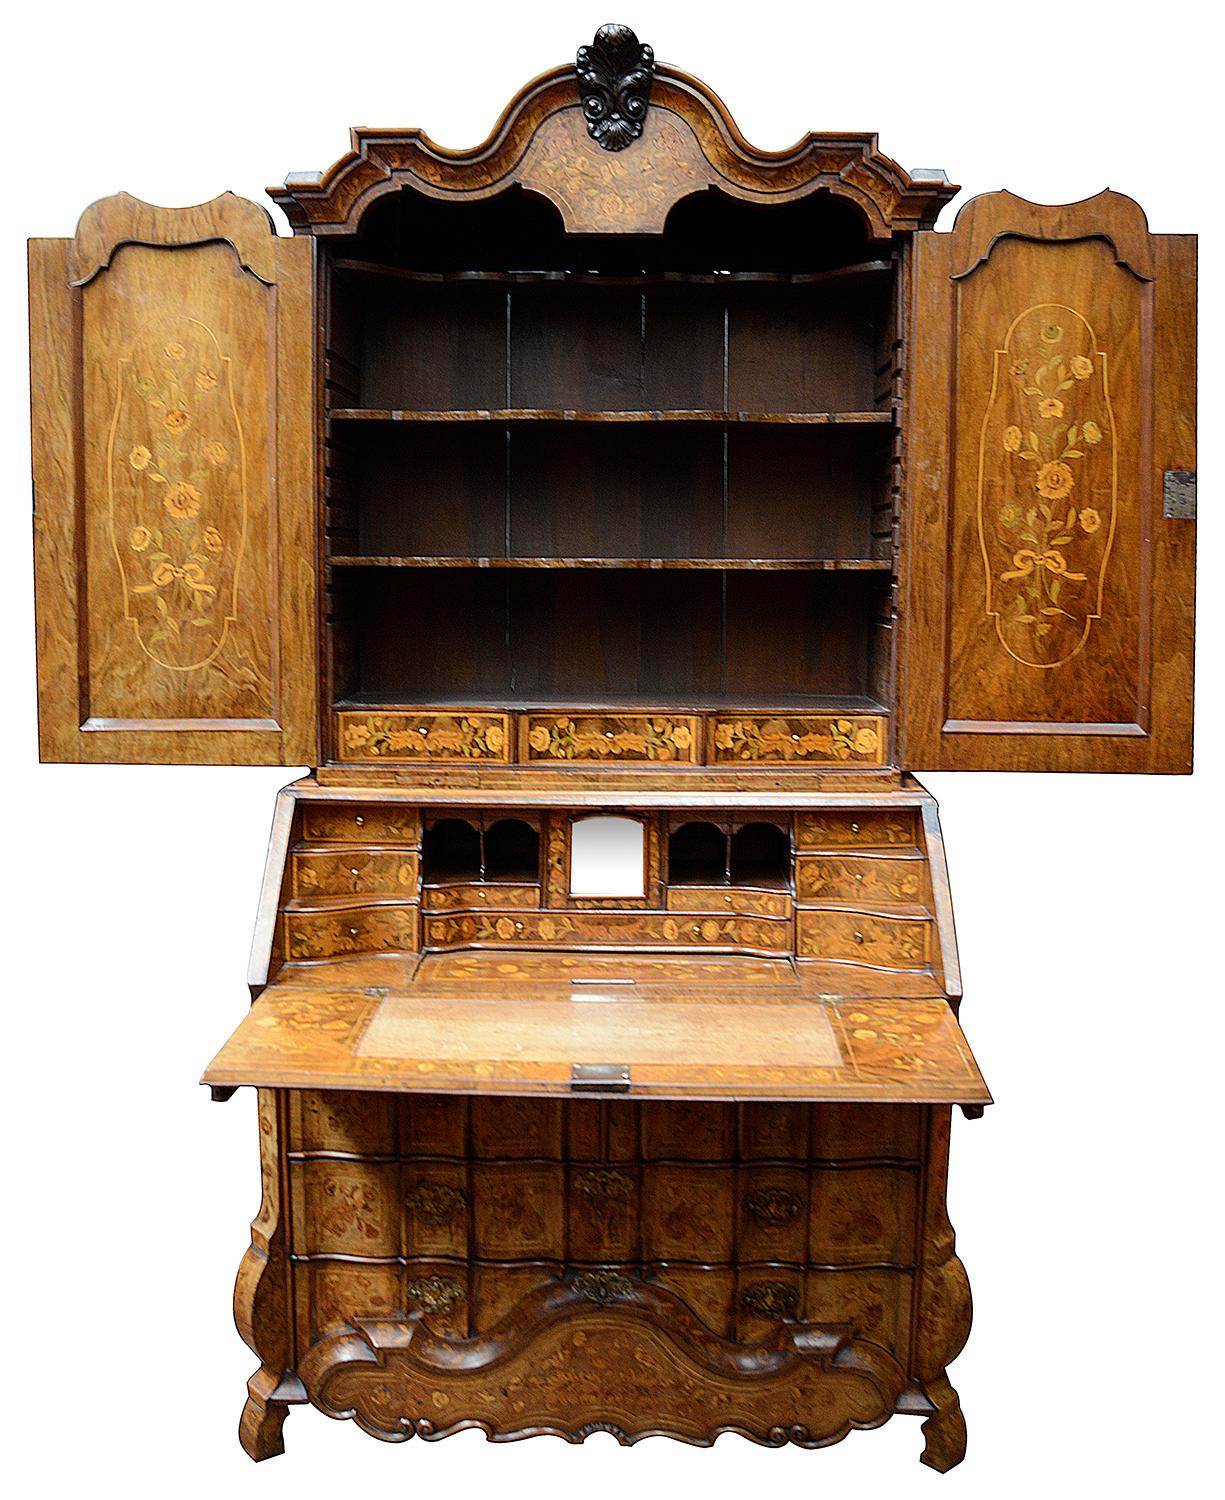 A very imposing good quality 18th century Dutch Marquetry bureau bookcase, having wonderful flowers, birds, classical scull and urn decoration. The two doors above opening to reveal inlay to the reverse, three adjustable shelves and three inlaid